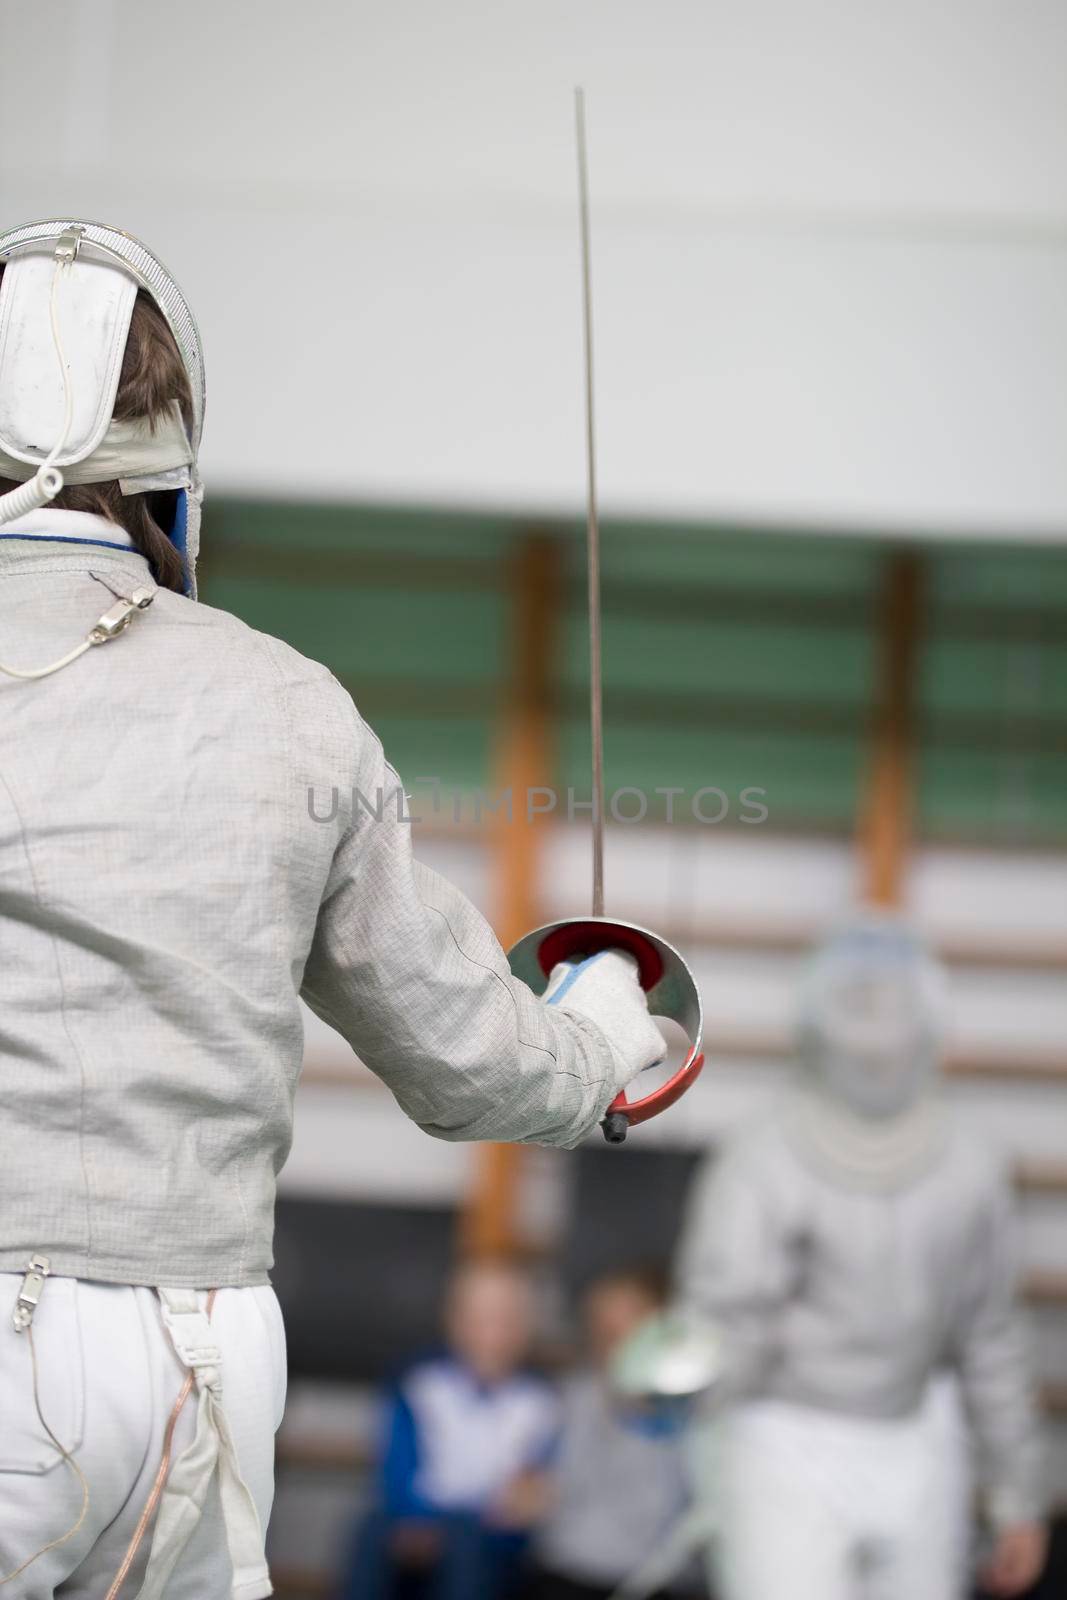 Two teenager fencers fighting with rapiers on the fencing tournament, telephoto shot